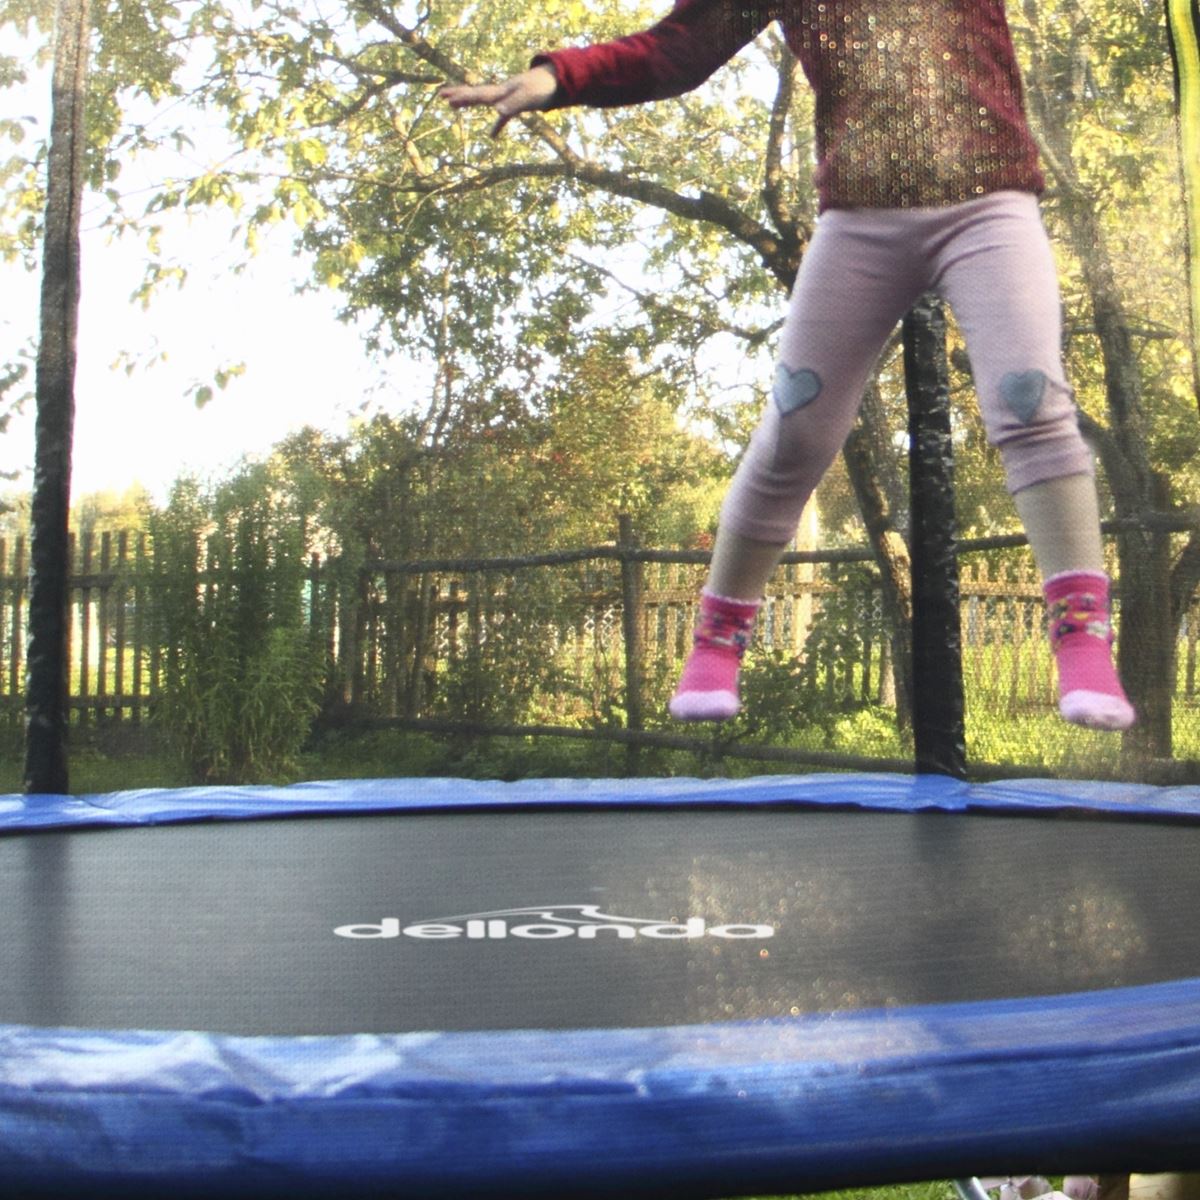 Dellonda 8ft Heavy-Duty Outdoor Trampoline with Safety Enclosure Net